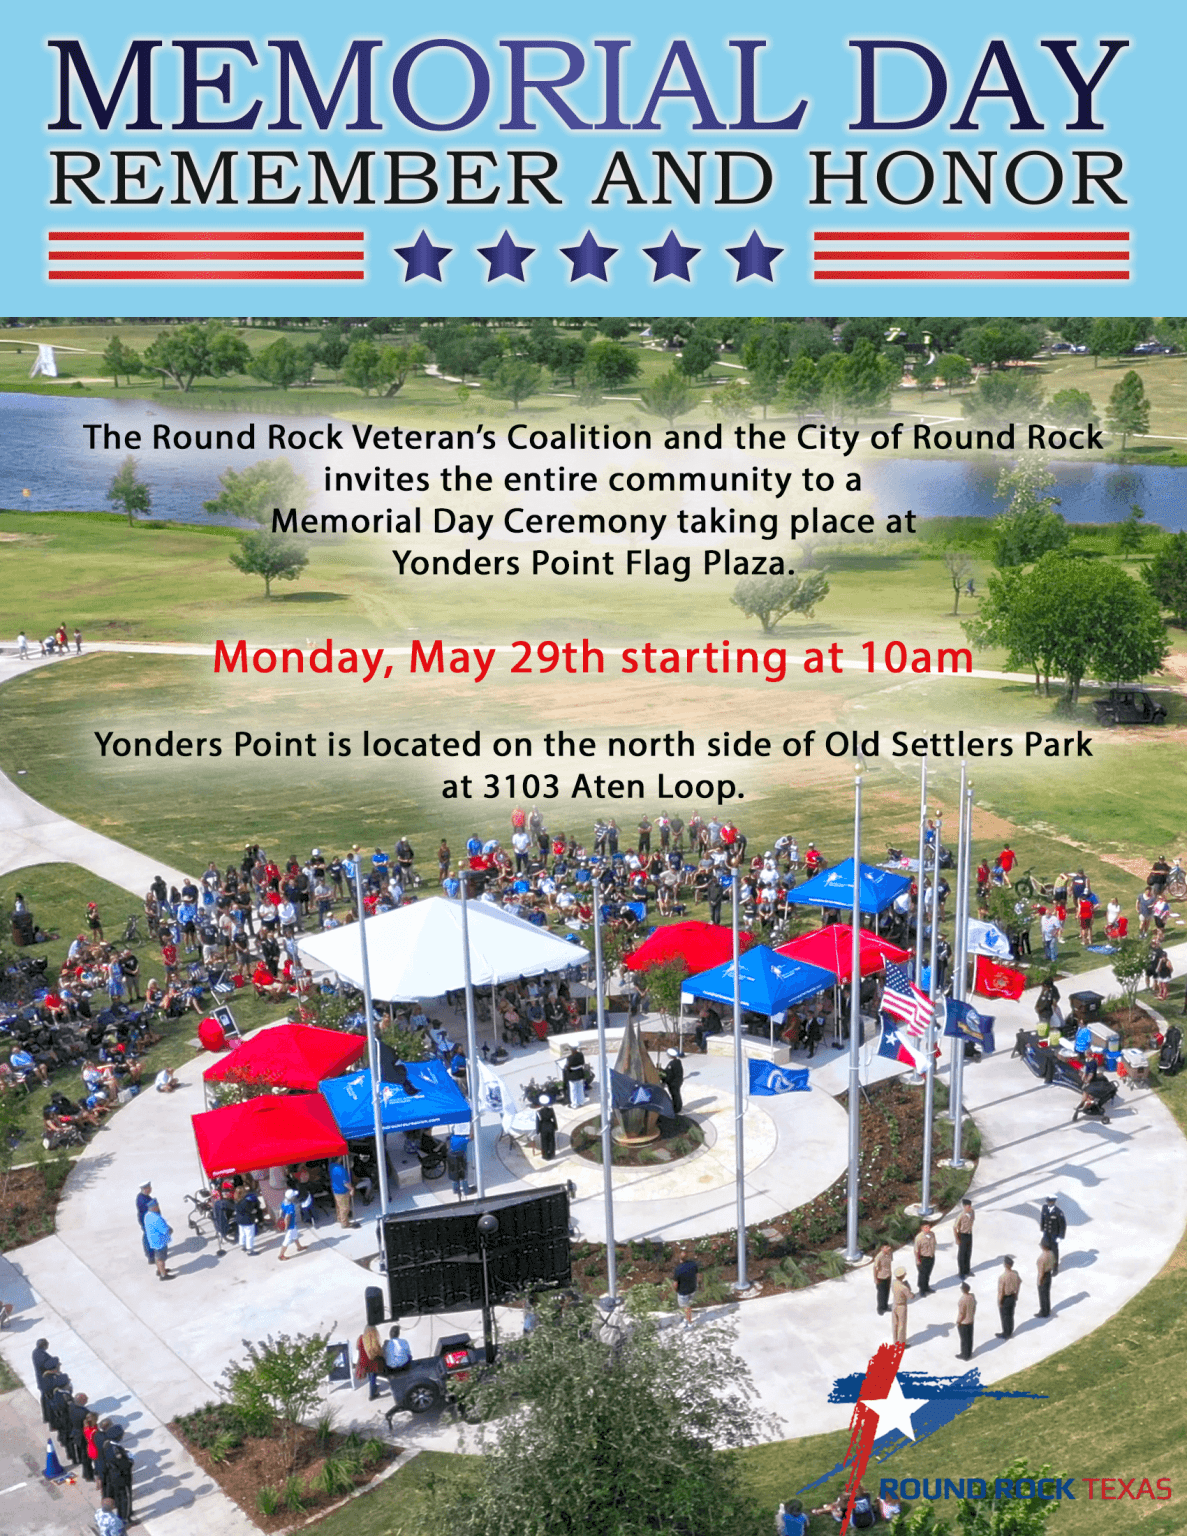 FREE Memorial Day Events in Austin